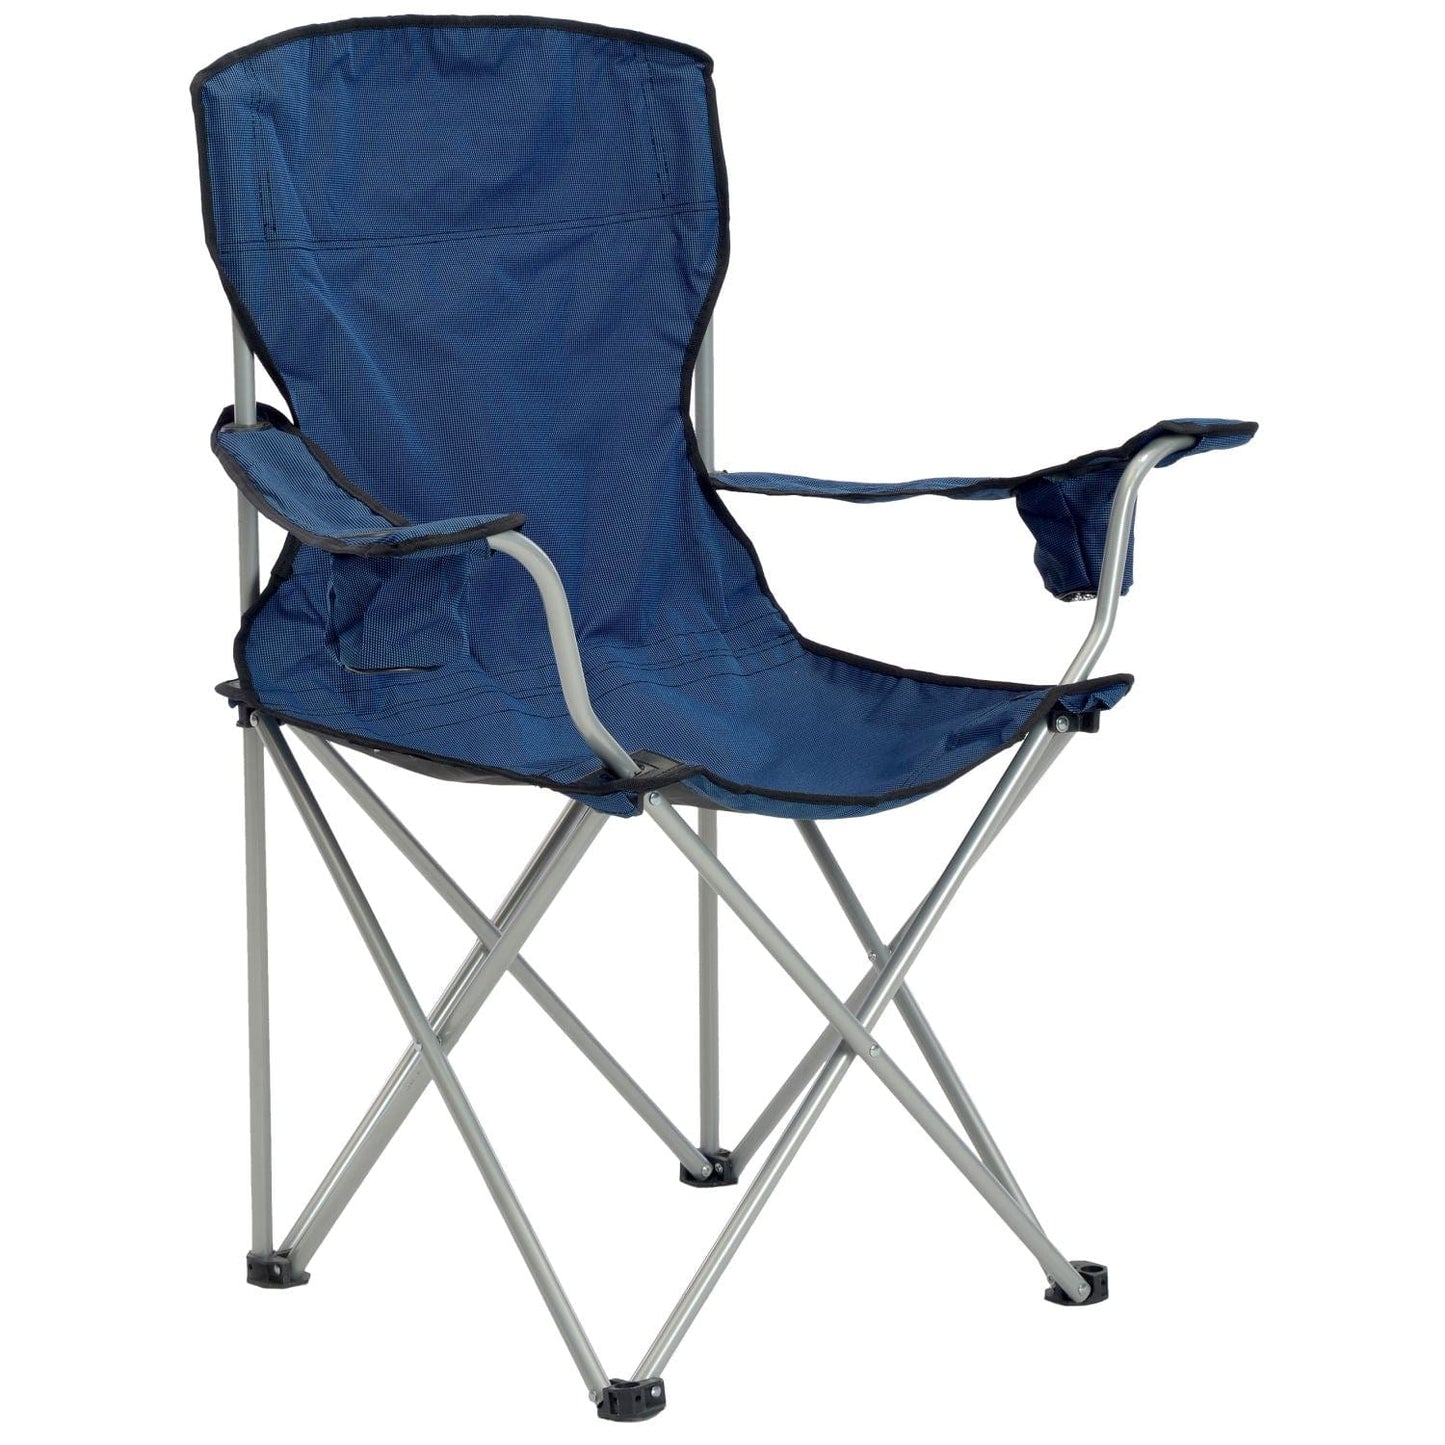 The Fulfiller Portable Chairs Quik Chair | Deluxe Folding Chair - Navy/Black 137622DS